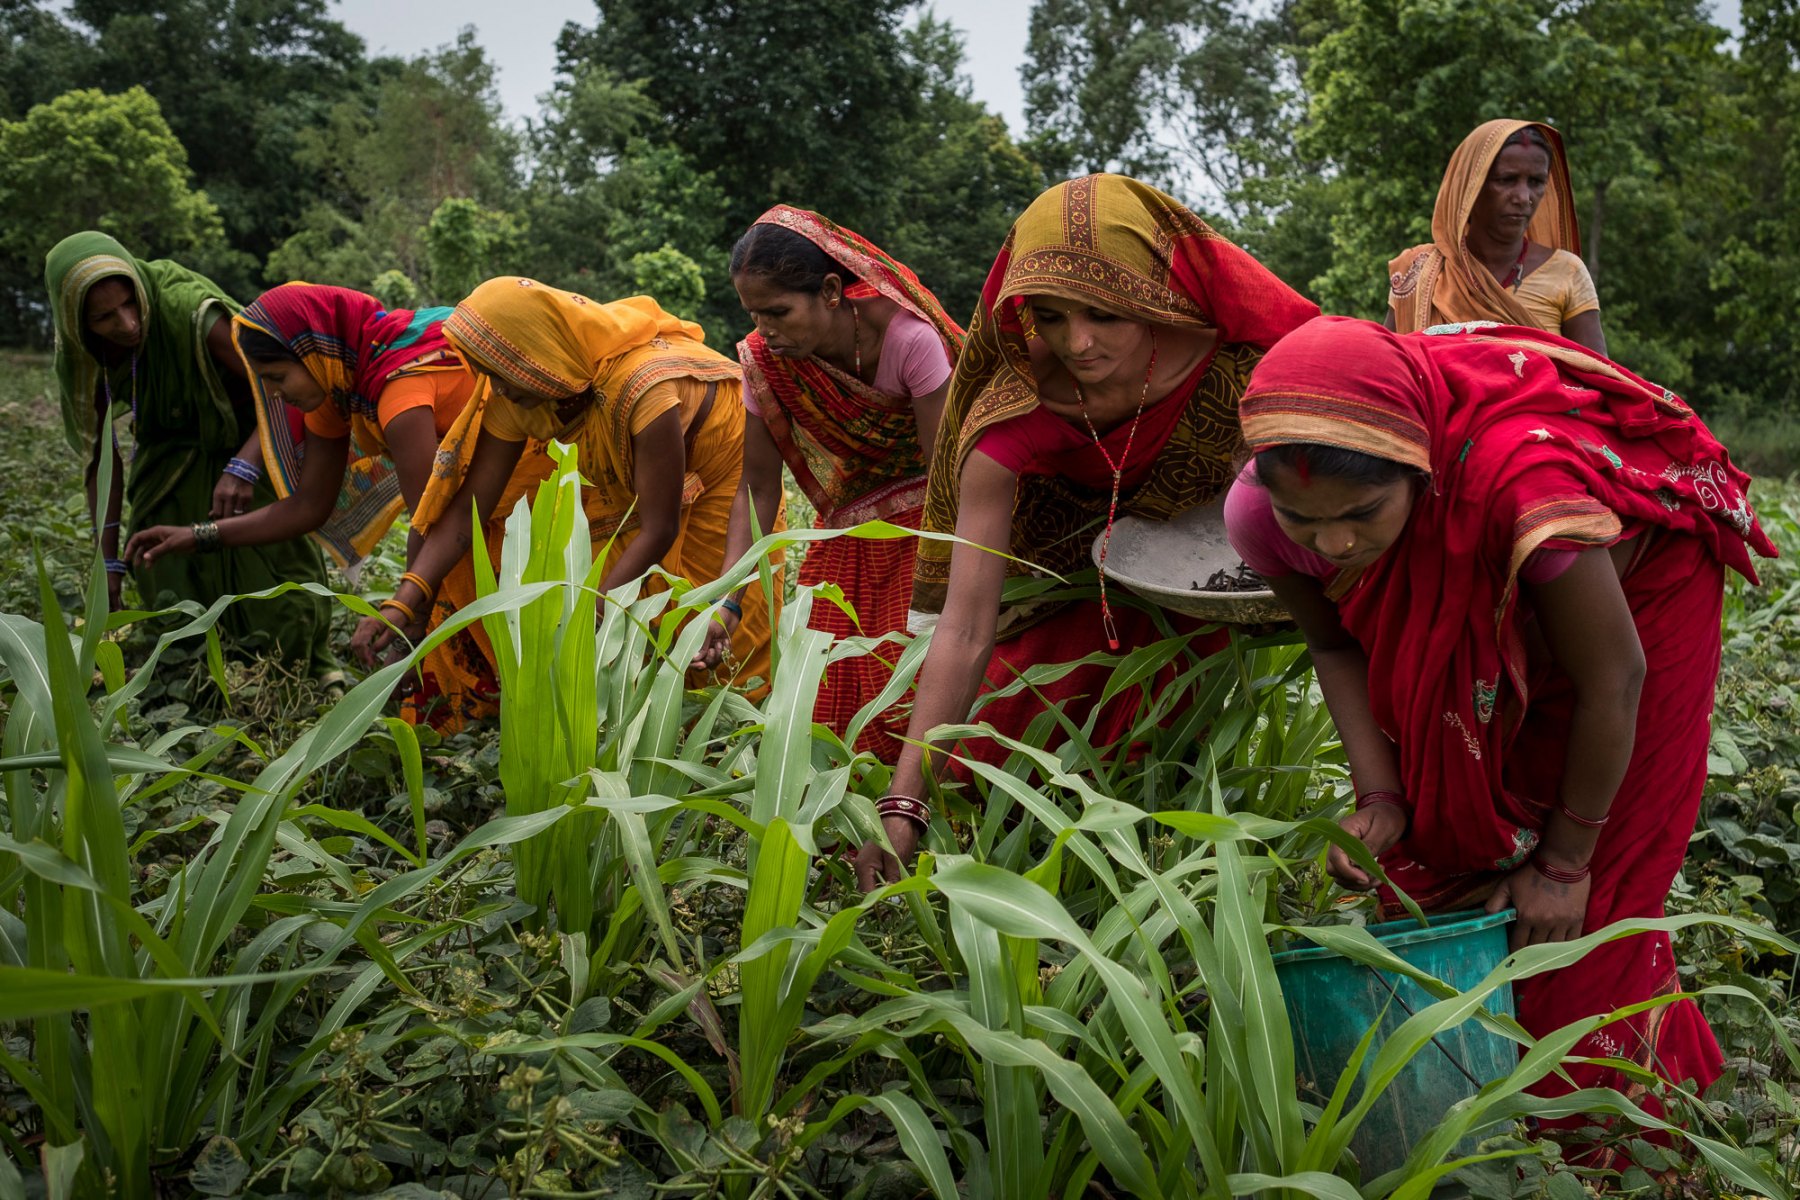 Mina Devi Yadav (red sari) and others from a women's farming group work together to pick mung beans. The group is part of an ACIAR conservation agriculture project spanning the Eastern Gangetic Plains of Nepal, India and Bangladesh. The project aims to develop more intensive, sustainable timely planting of the main cereal crops – rice, maize and wheat – increasing yield and allowing for a third crop such as mung beans. In recent years huge numbers of young men have migrated to the Arab Gulf countries in search of higher paid work and this has led to what is called the 'feminisation of agriculture’. Because of increasing rates of male migration from poor farming households, usually to work in the cities, women have emerged as the key producers, performing a wide range of tasks related to planning, cropping, managing, processing and marketing. This project is contributing to developing the potential of one of Asia’s great future food bowls the Eastern Gangetic Plains.